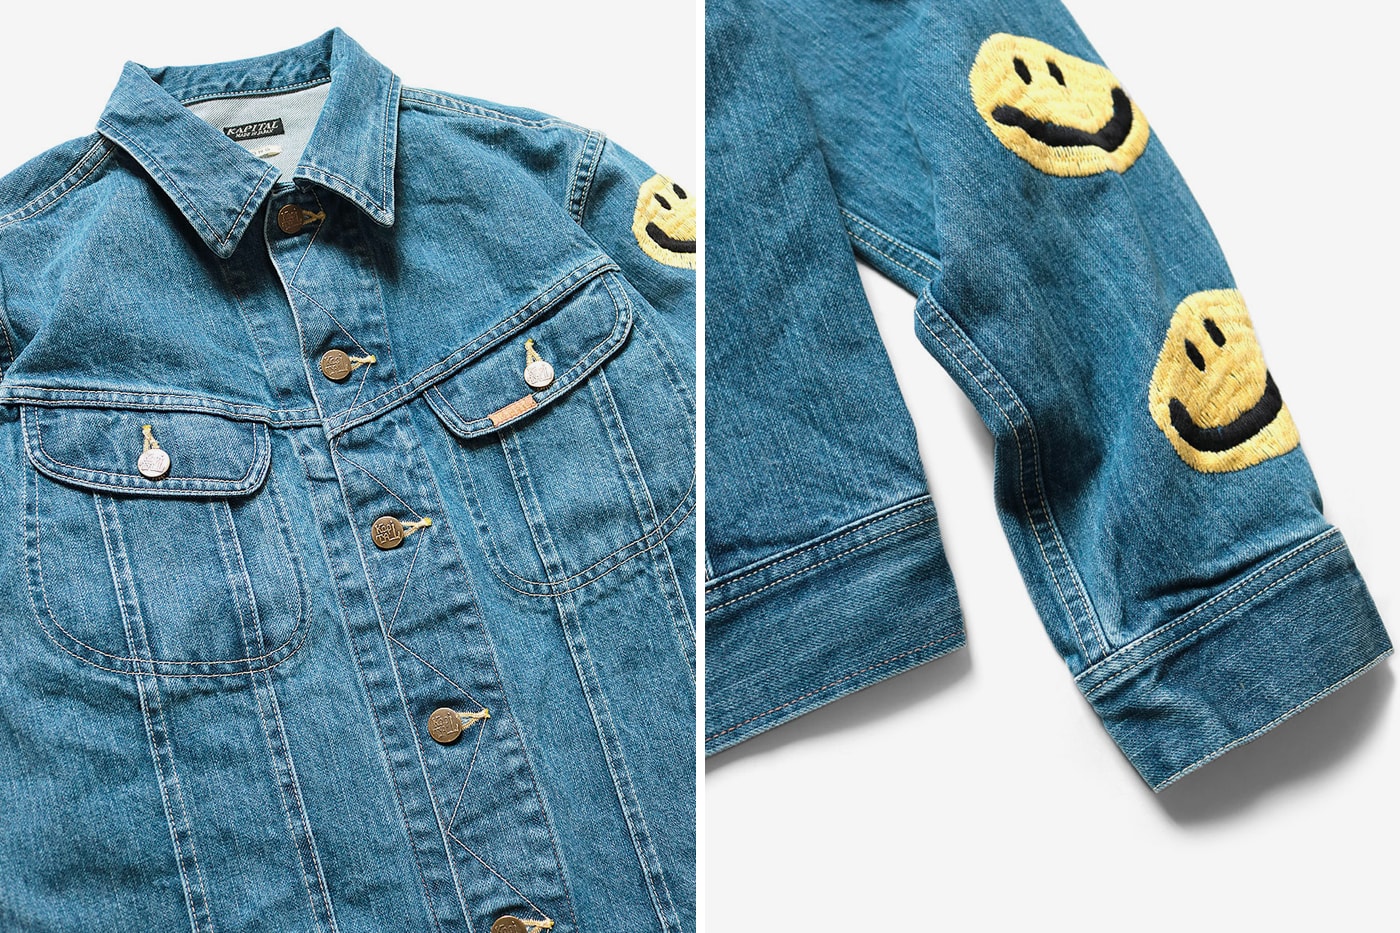 KAPITAL 14oz Denim Smile Embroidery Westerner Jacket jean indigo yellow brass buttons japanese classic retro vintage trucker americana Fall Winter 2019 Collection layers elongated